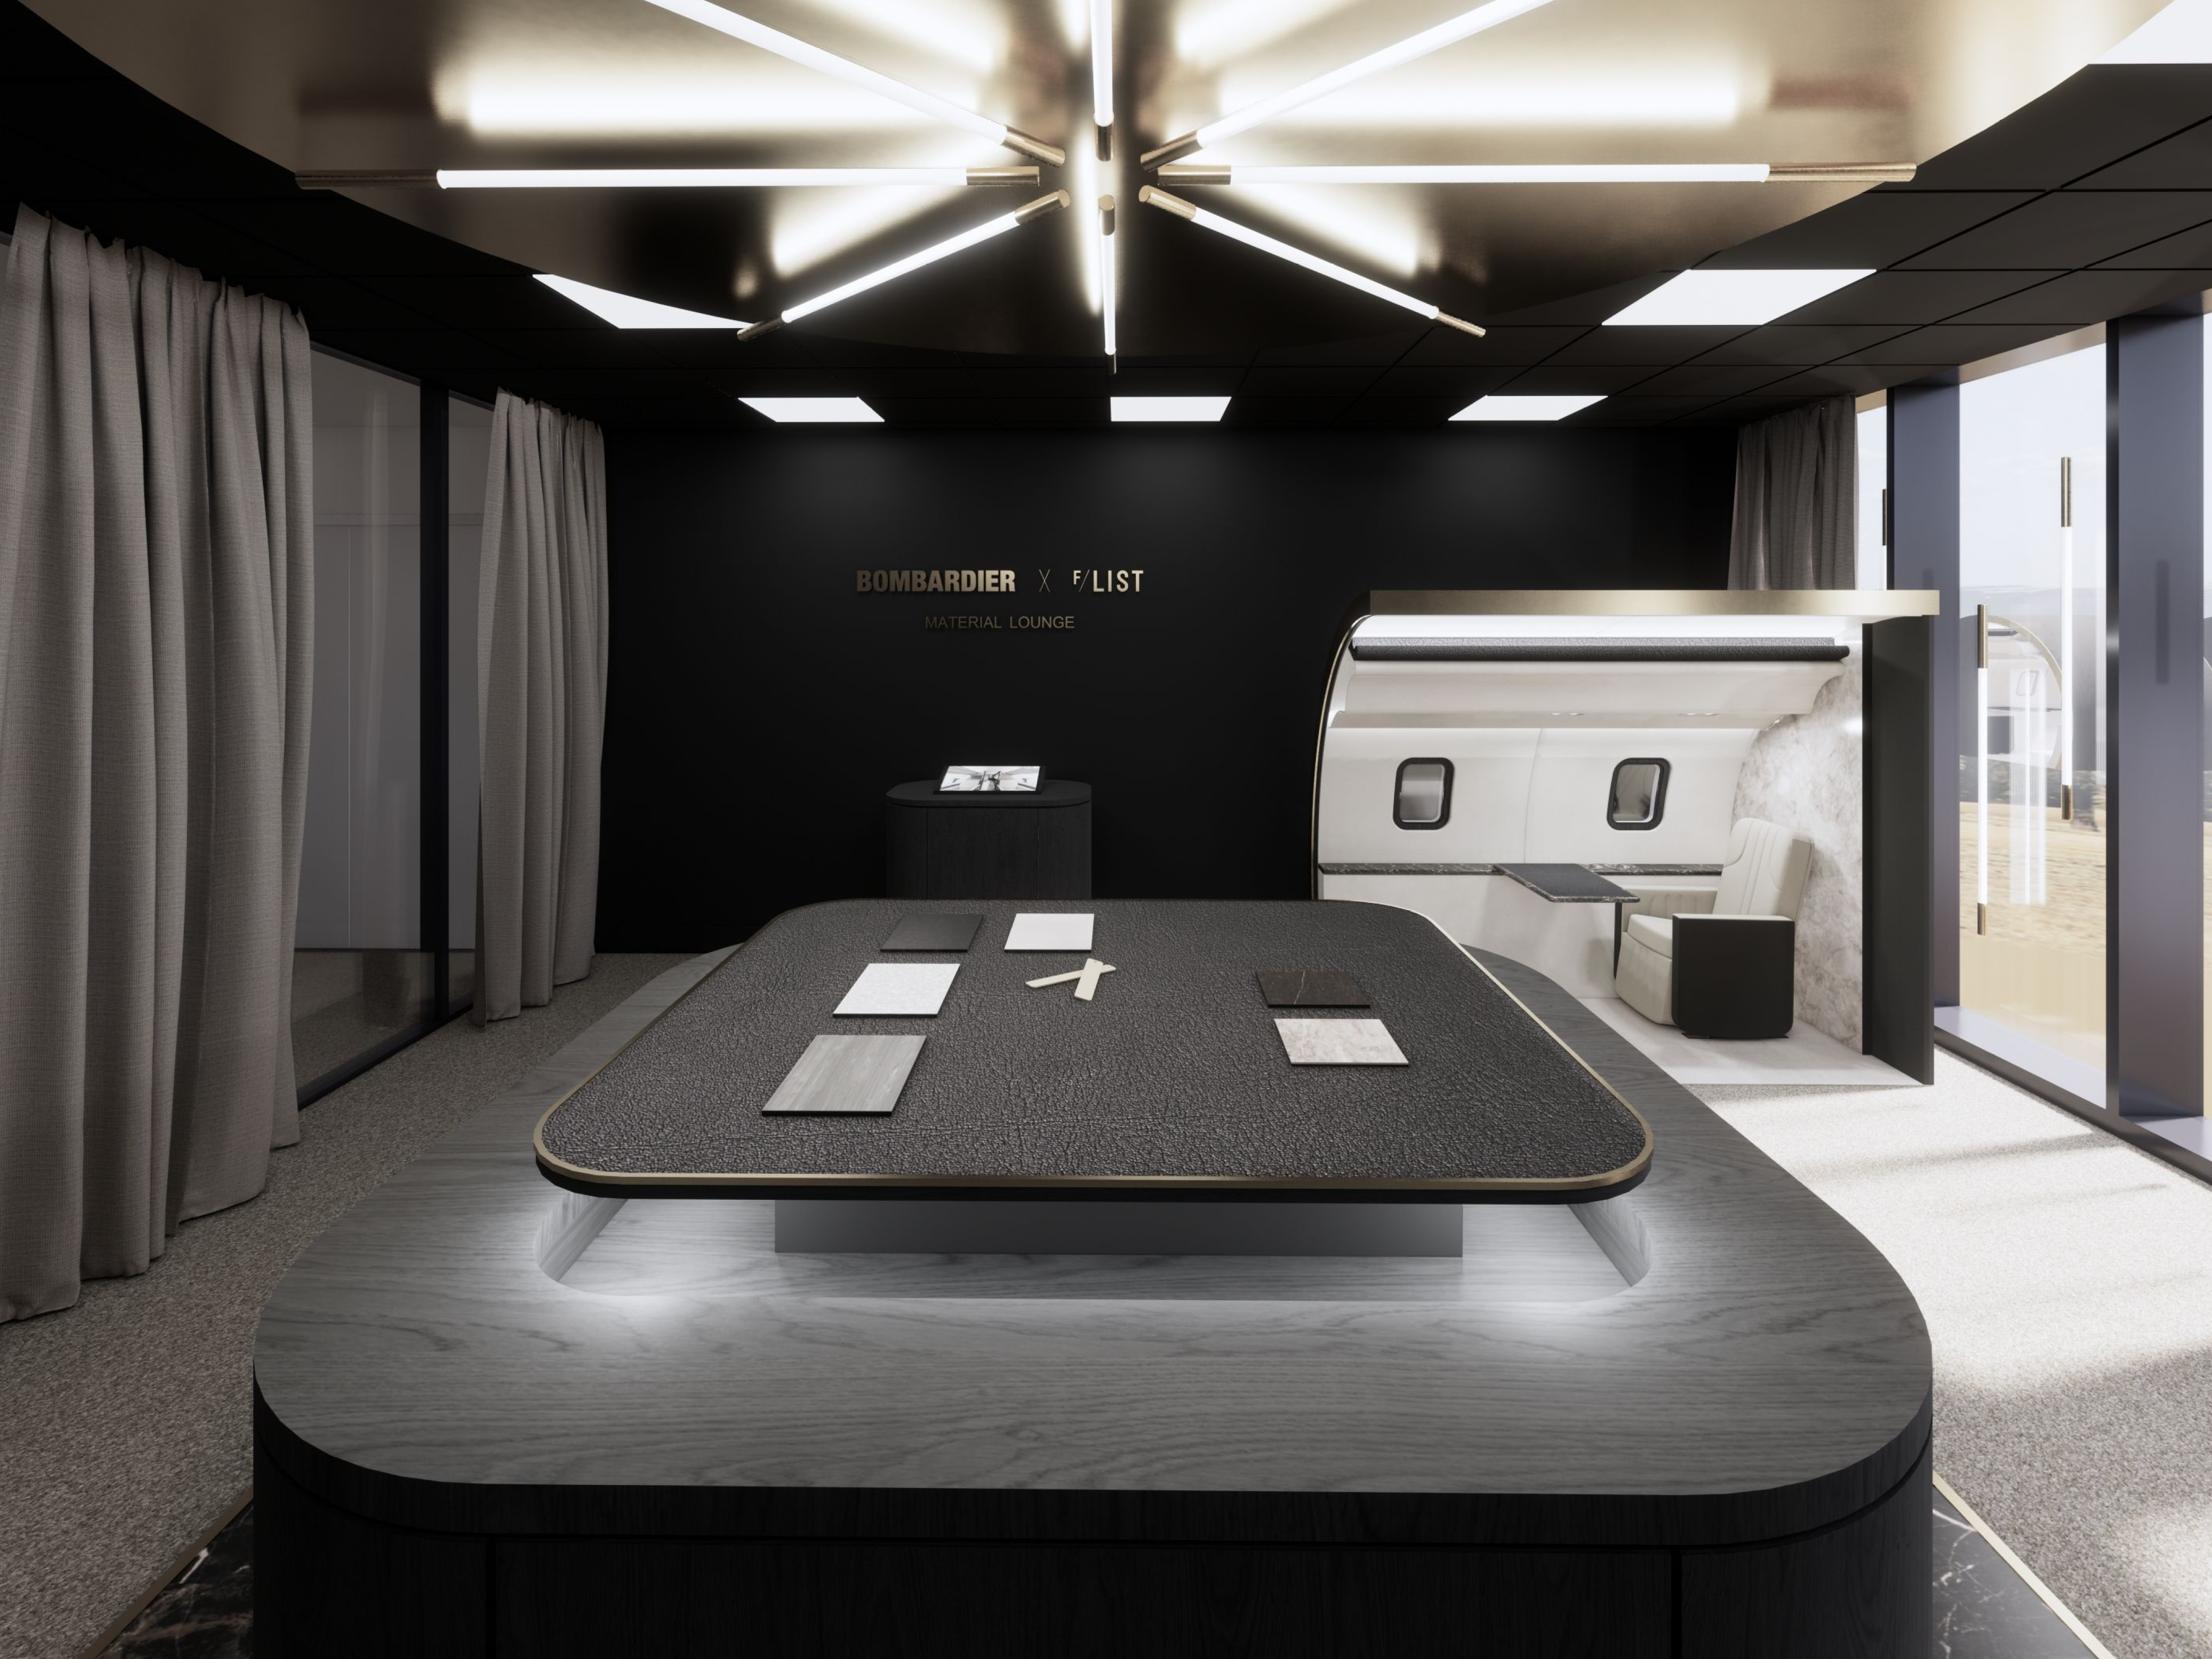 Bombardier x F/LIST Material Lounge